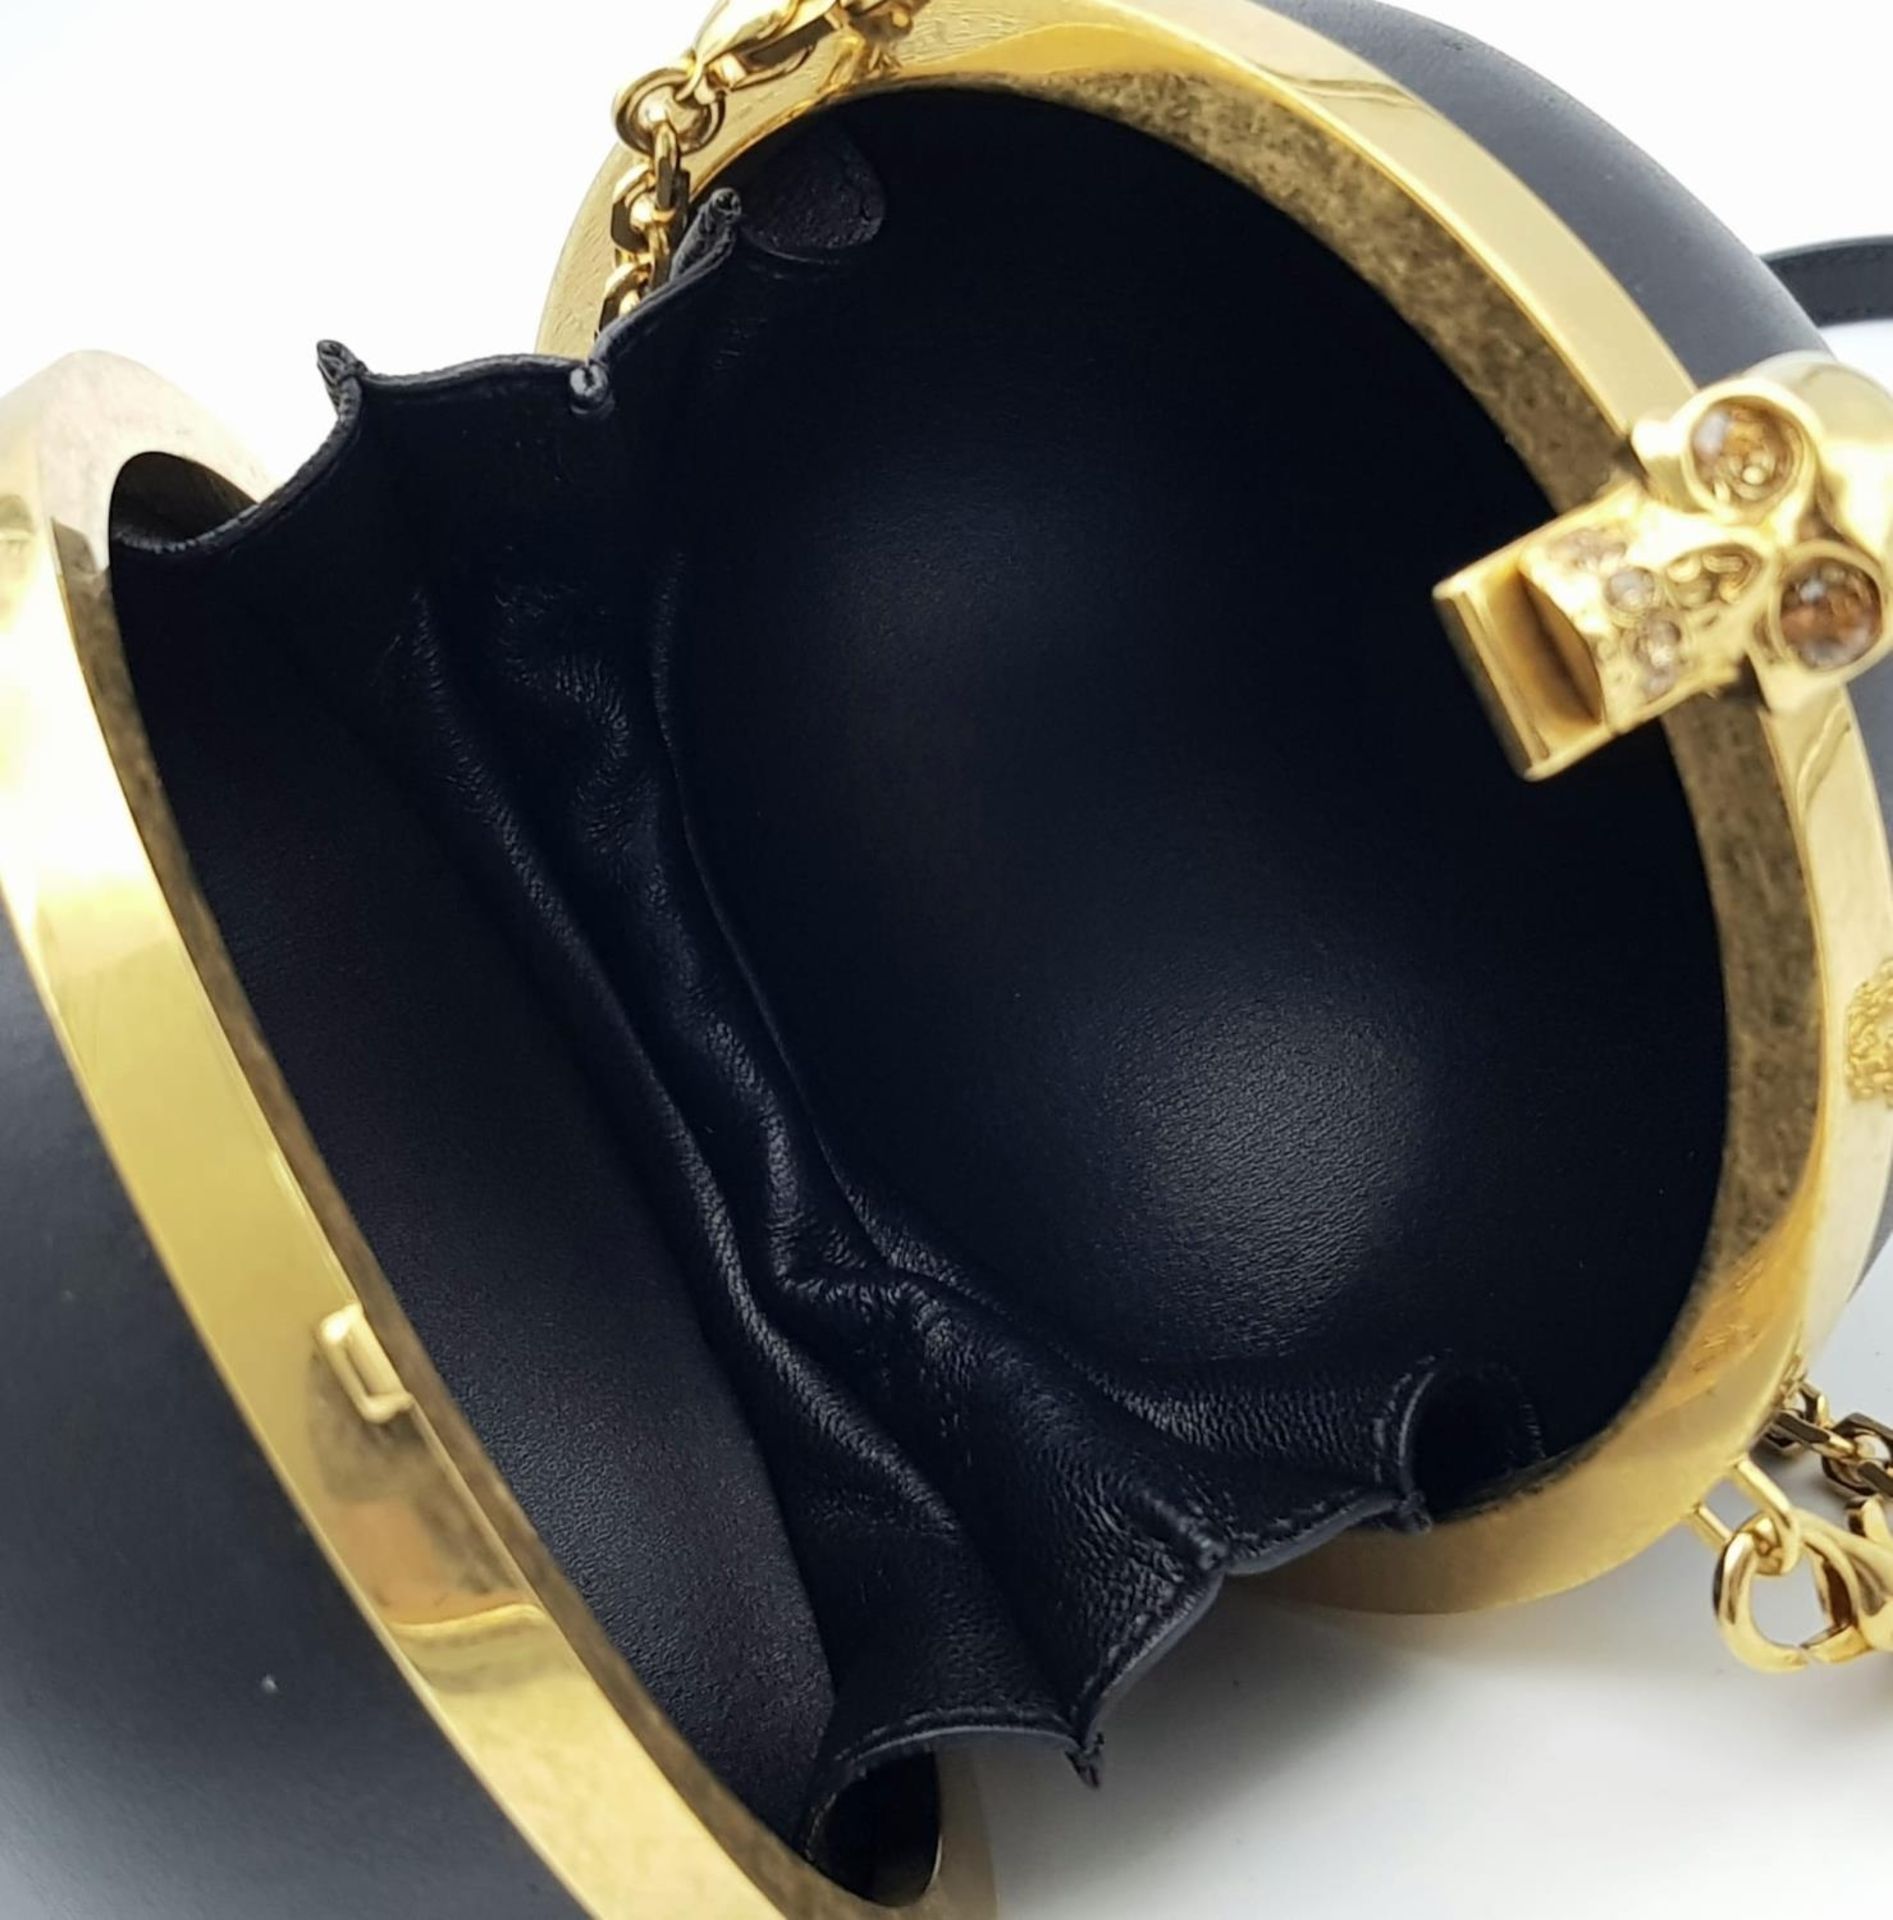 An Alexander Mcqueen Skull Ball Clutch Bag. Black leather exterior with gold tone hardware. - Image 4 of 6